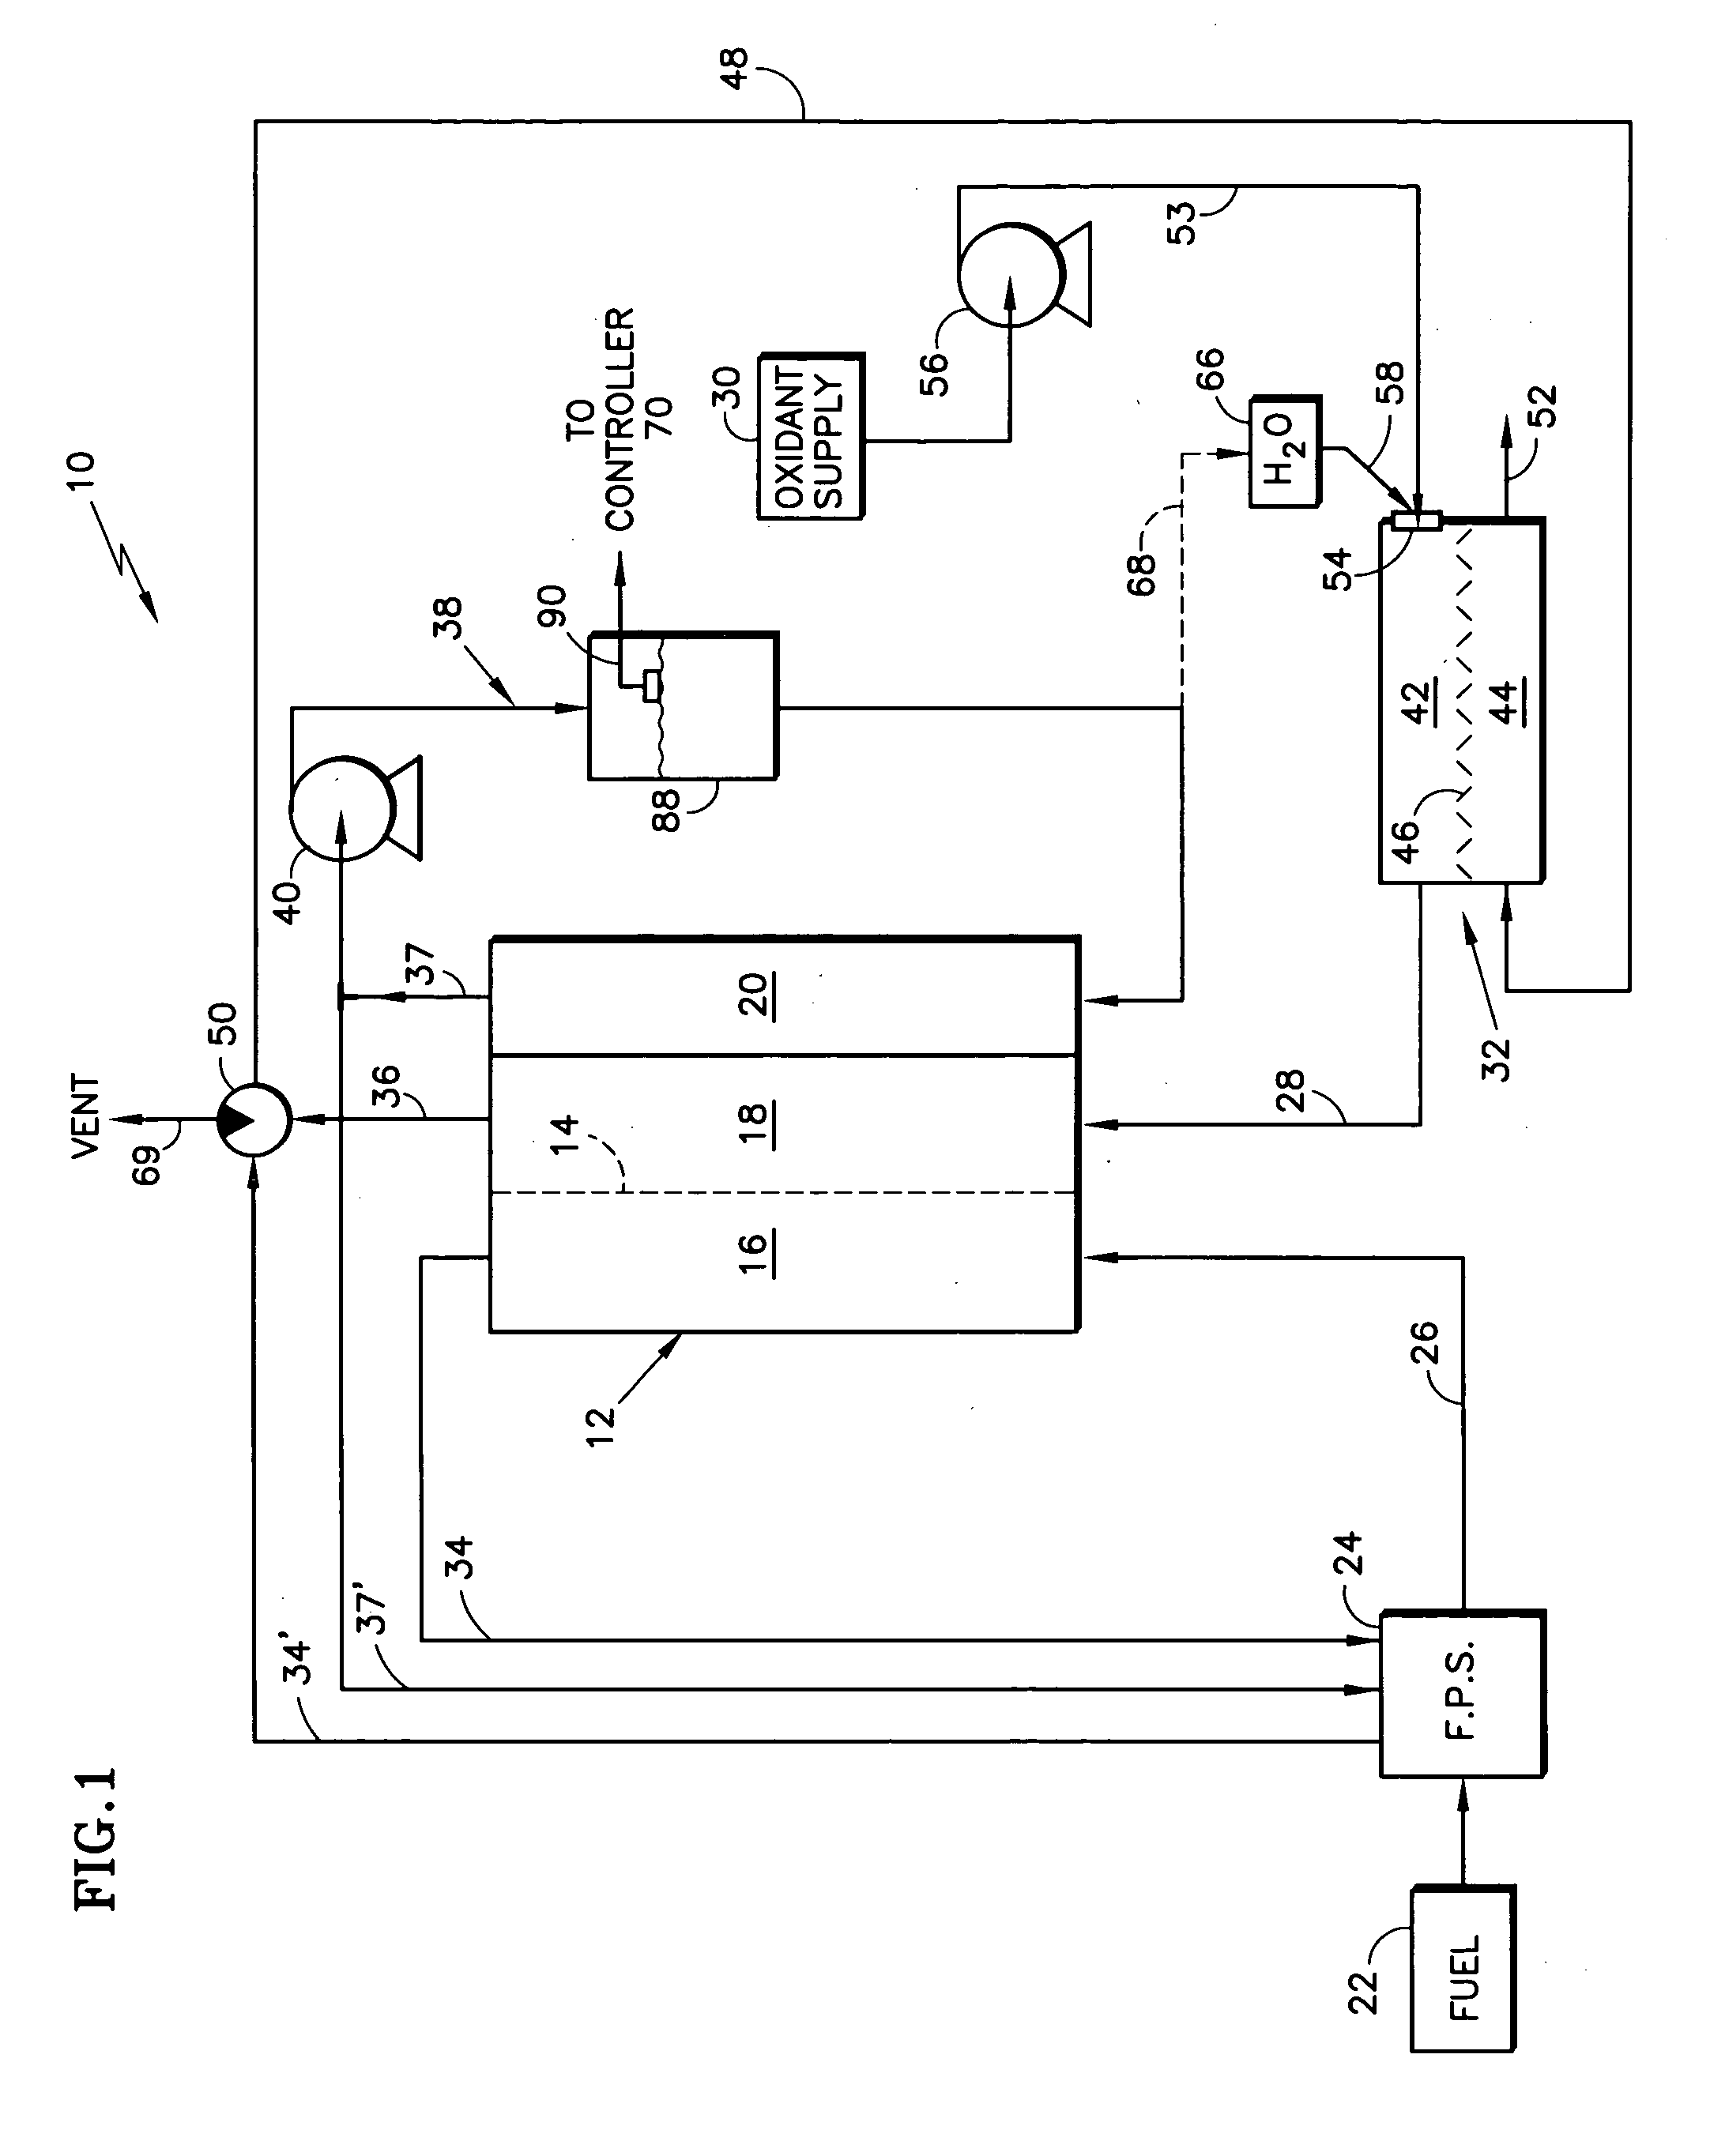 Method and apparatus for humidification control of an energy recovery device in a fuel cell power plant